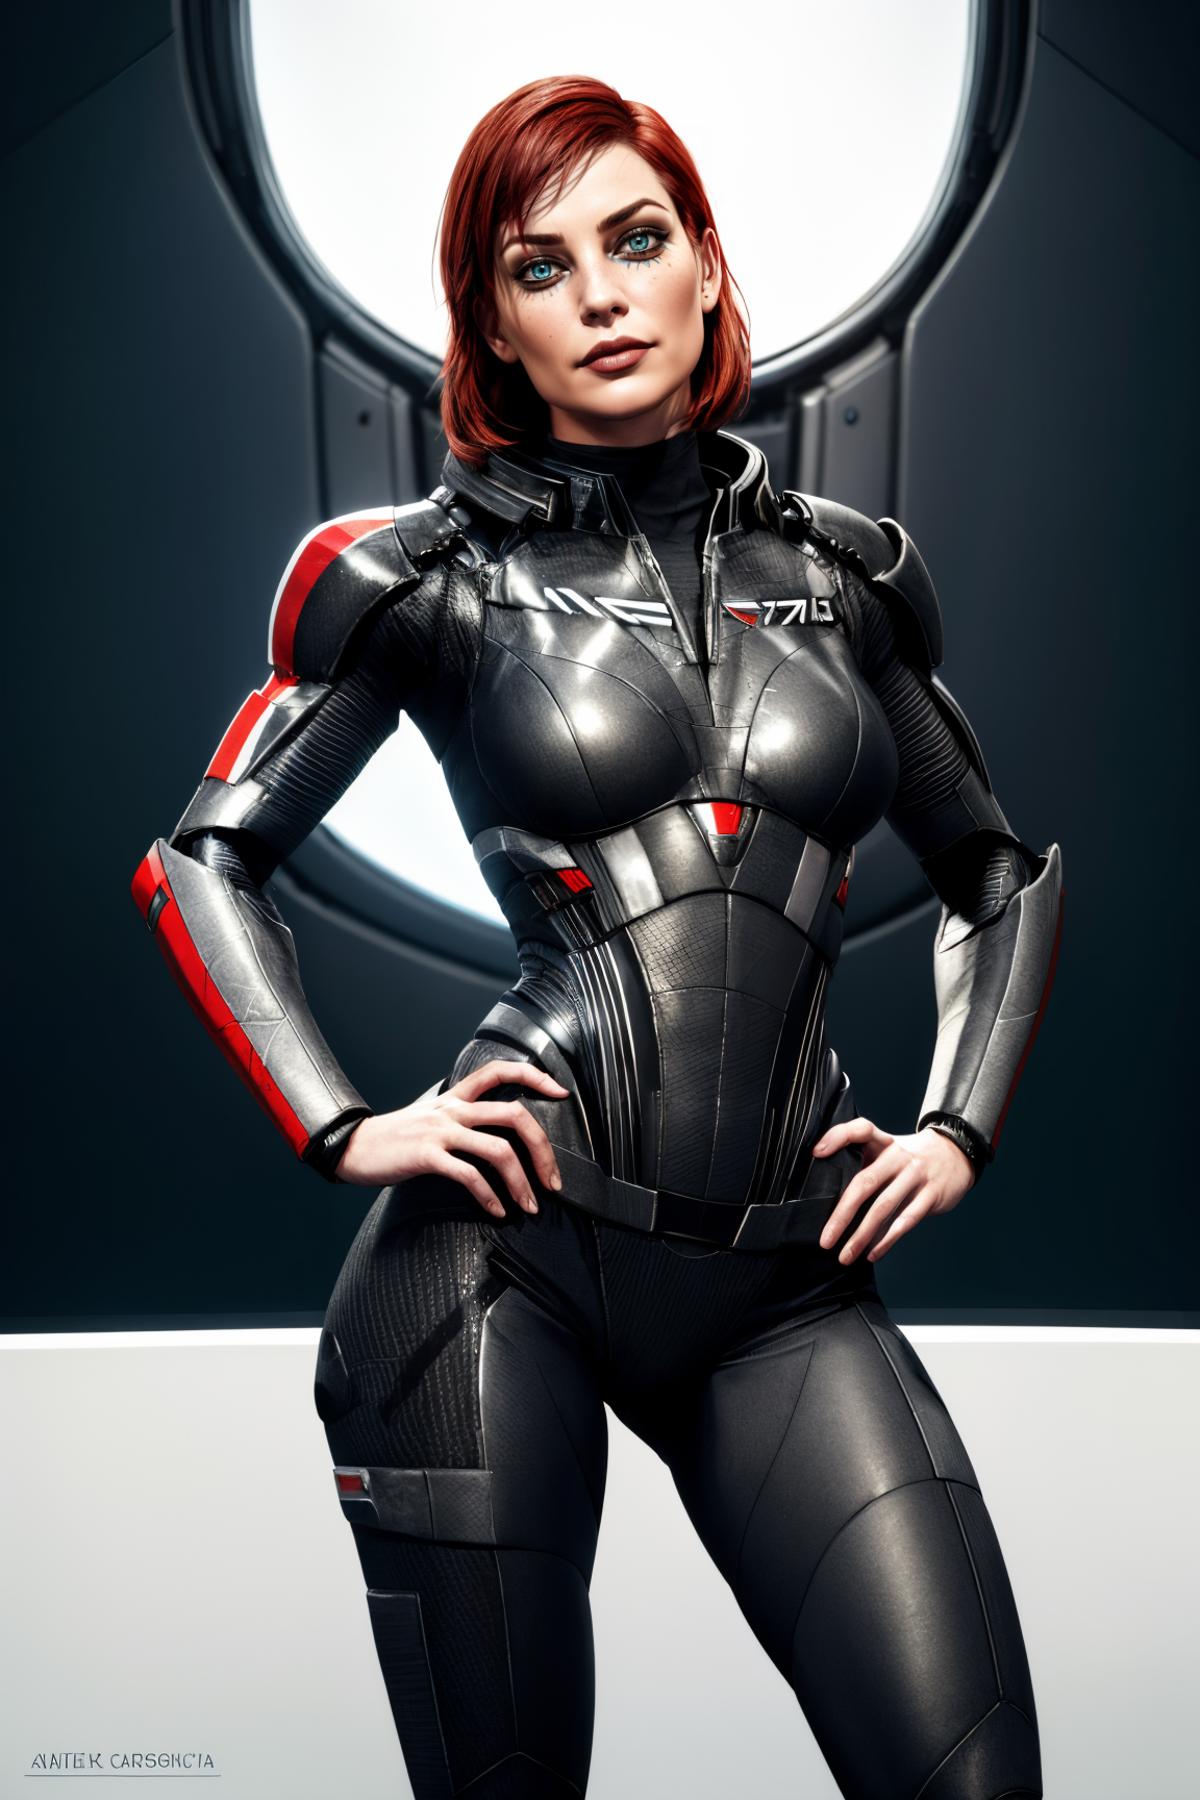 A 3D render of a woman in a black and red jumpsuit with a logo on the front.